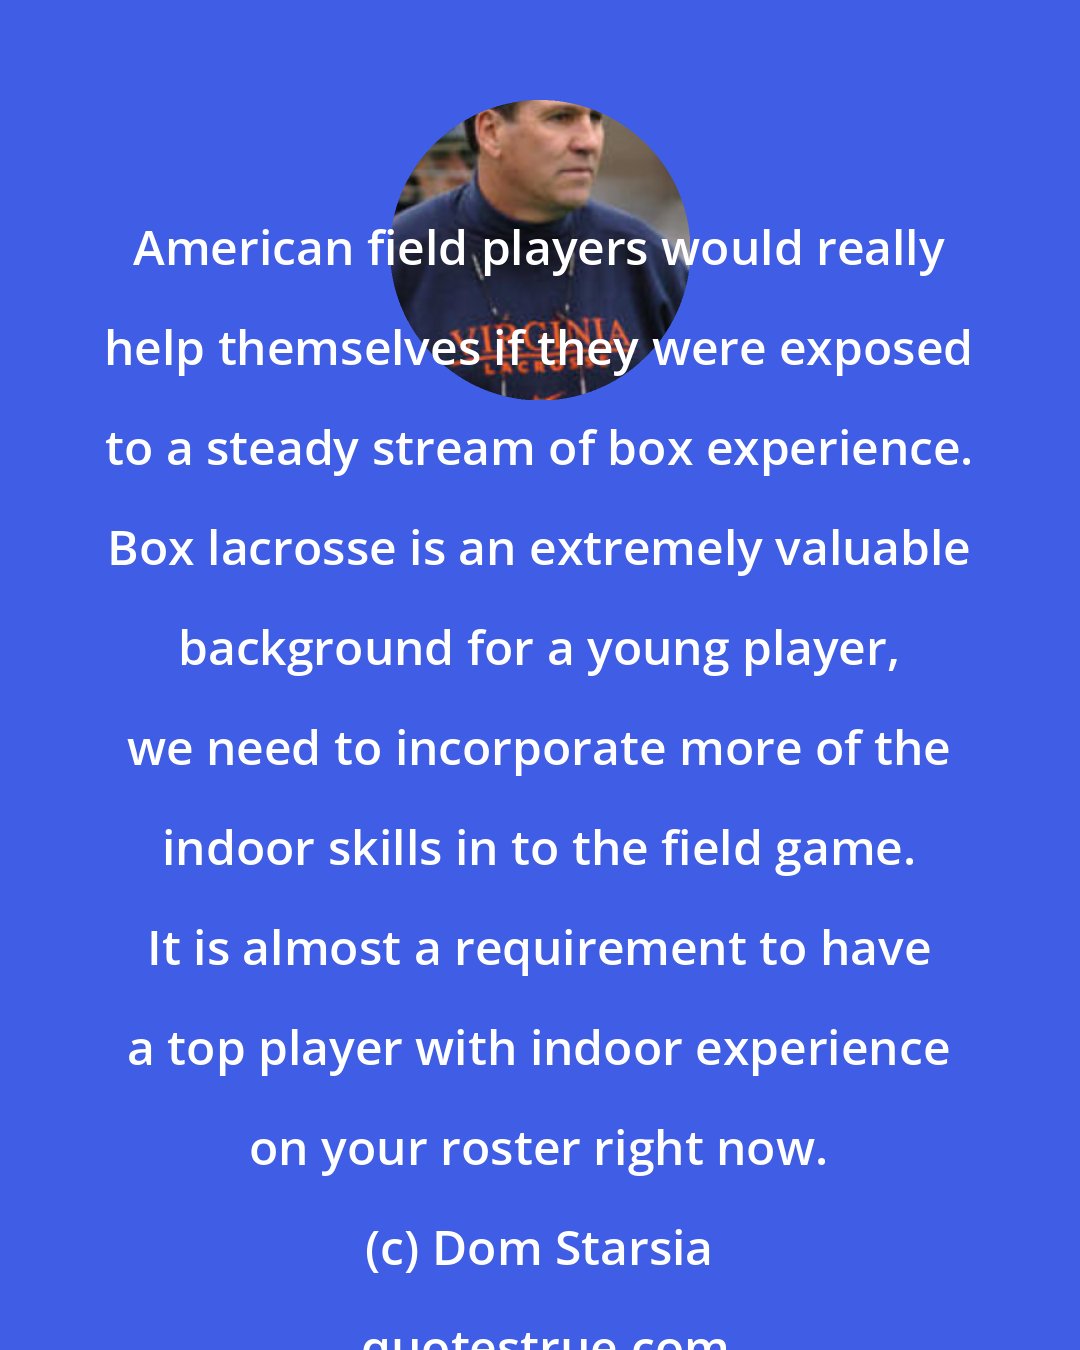 Dom Starsia: American field players would really help themselves if they were exposed to a steady stream of box experience. Box lacrosse is an extremely valuable background for a young player, we need to incorporate more of the indoor skills in to the field game. It is almost a requirement to have a top player with indoor experience on your roster right now.